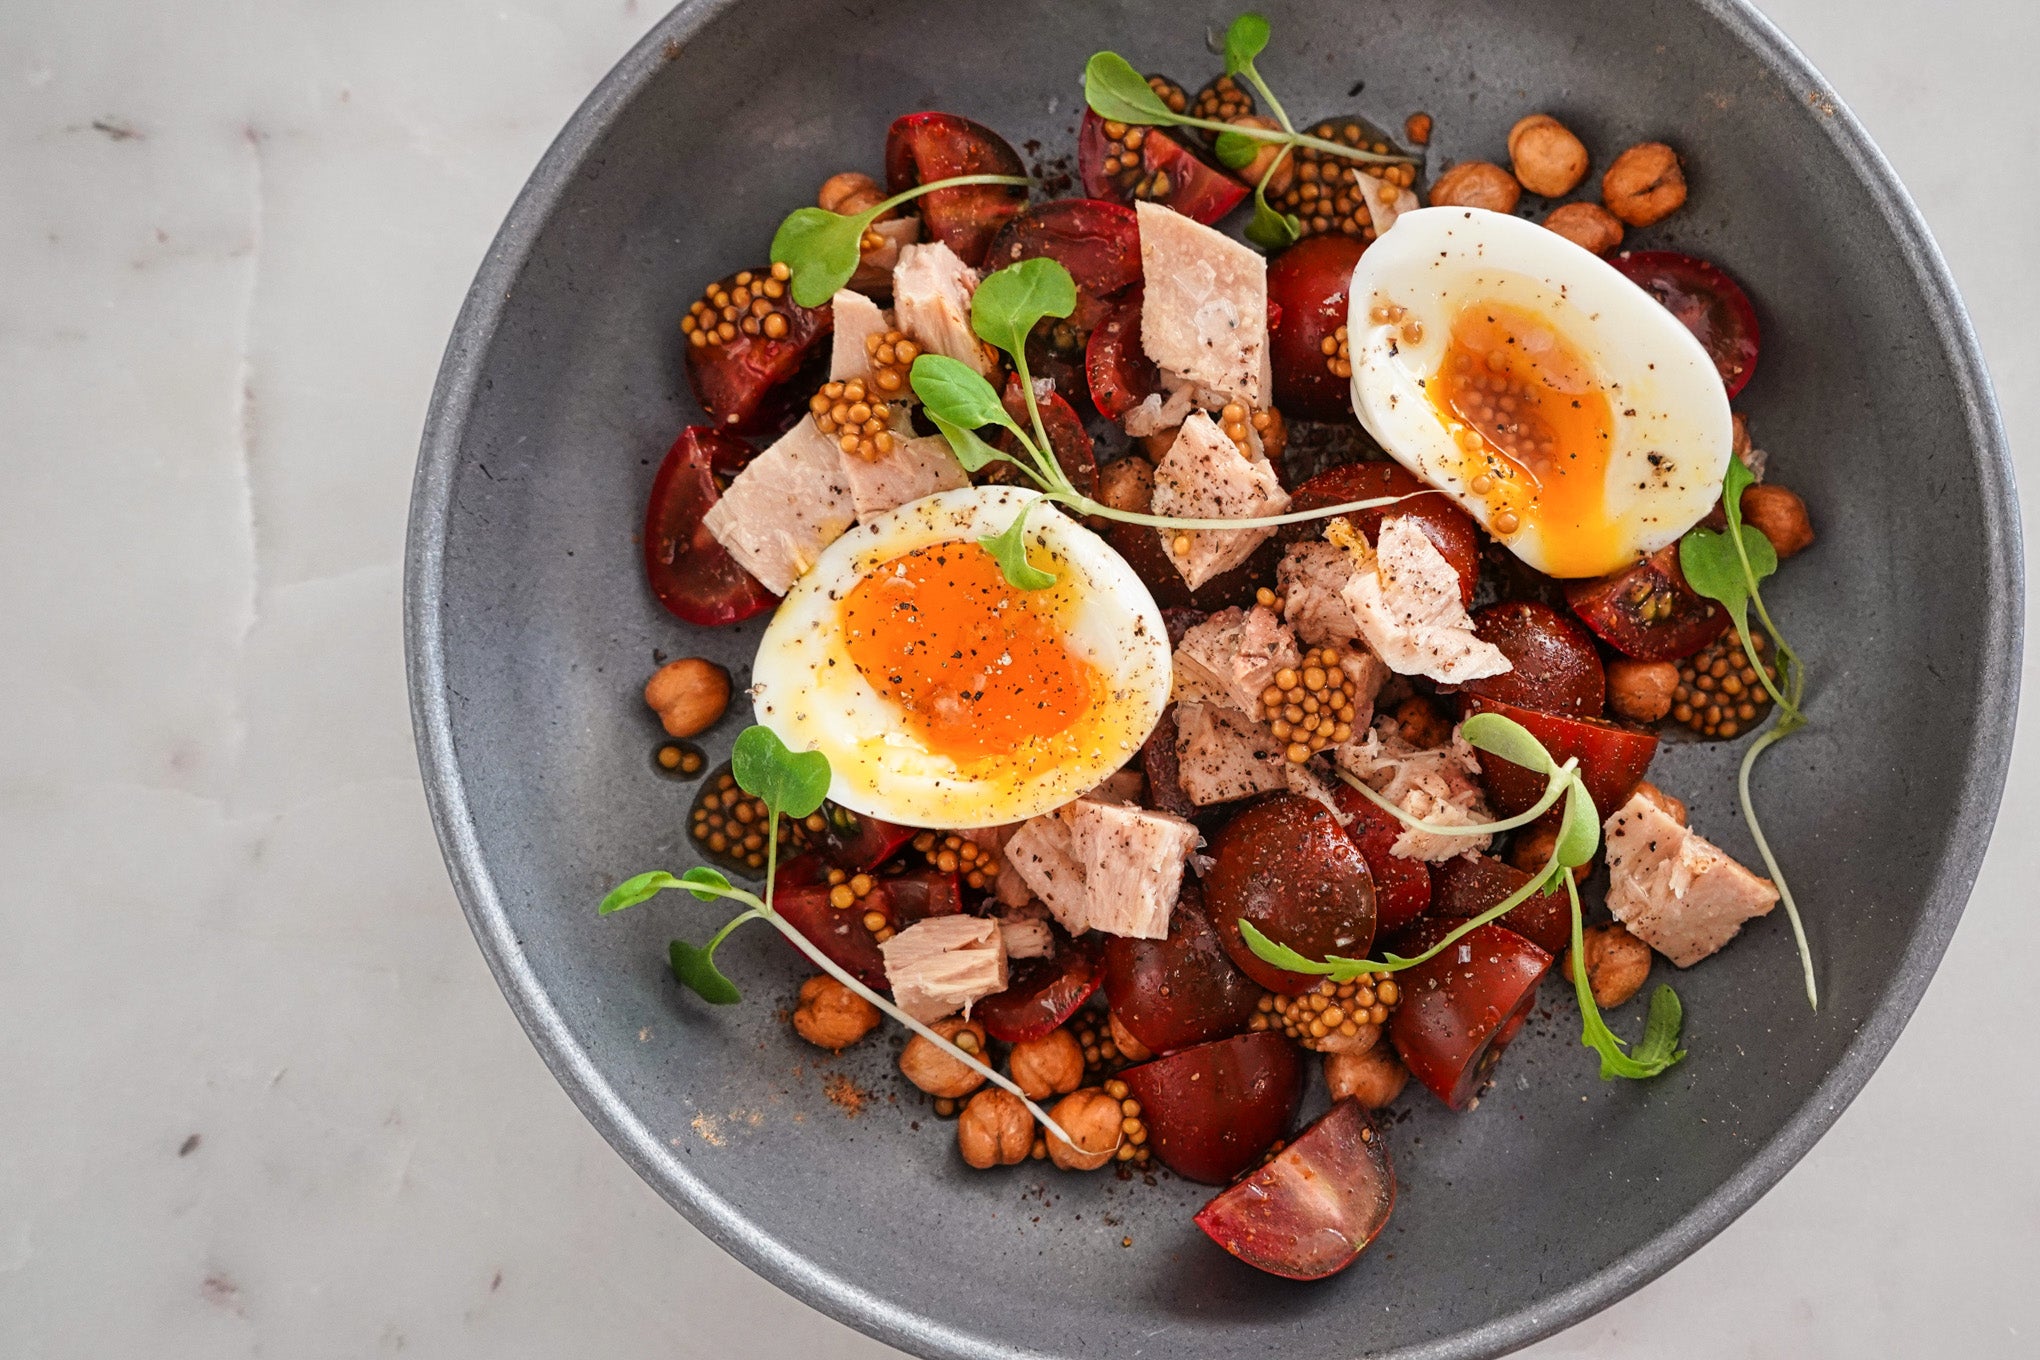 tuna and tomato salad with jammy eggs, chickpeas and mustard seeds